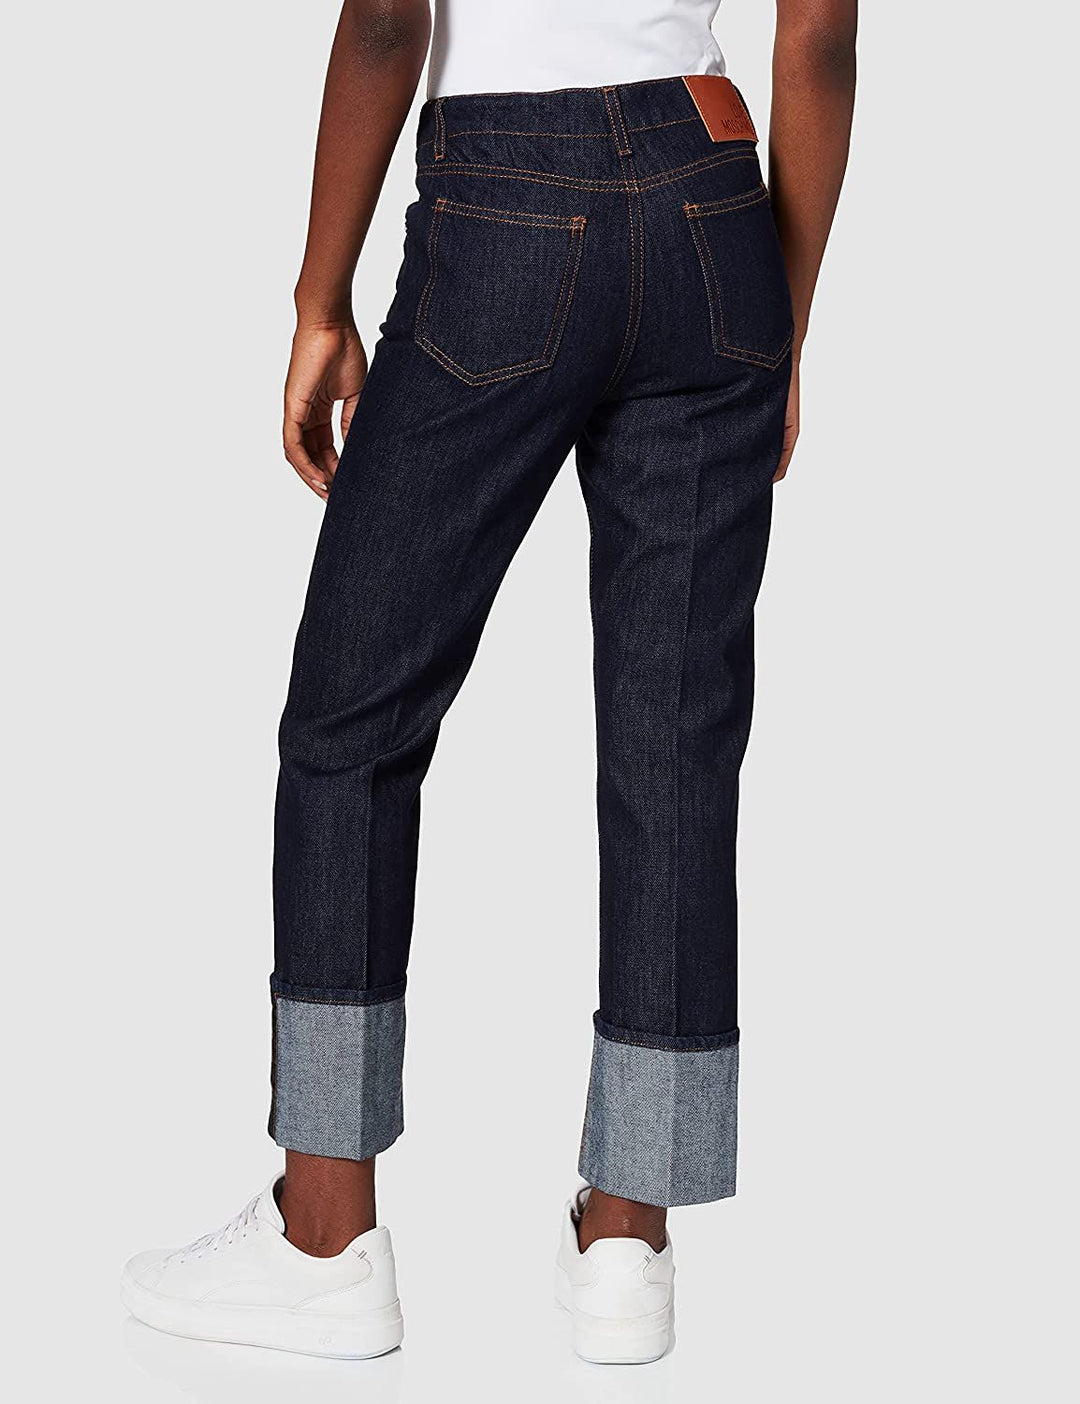 Love Moschino Chic Cotton Denim Jeans with Fleece Accent